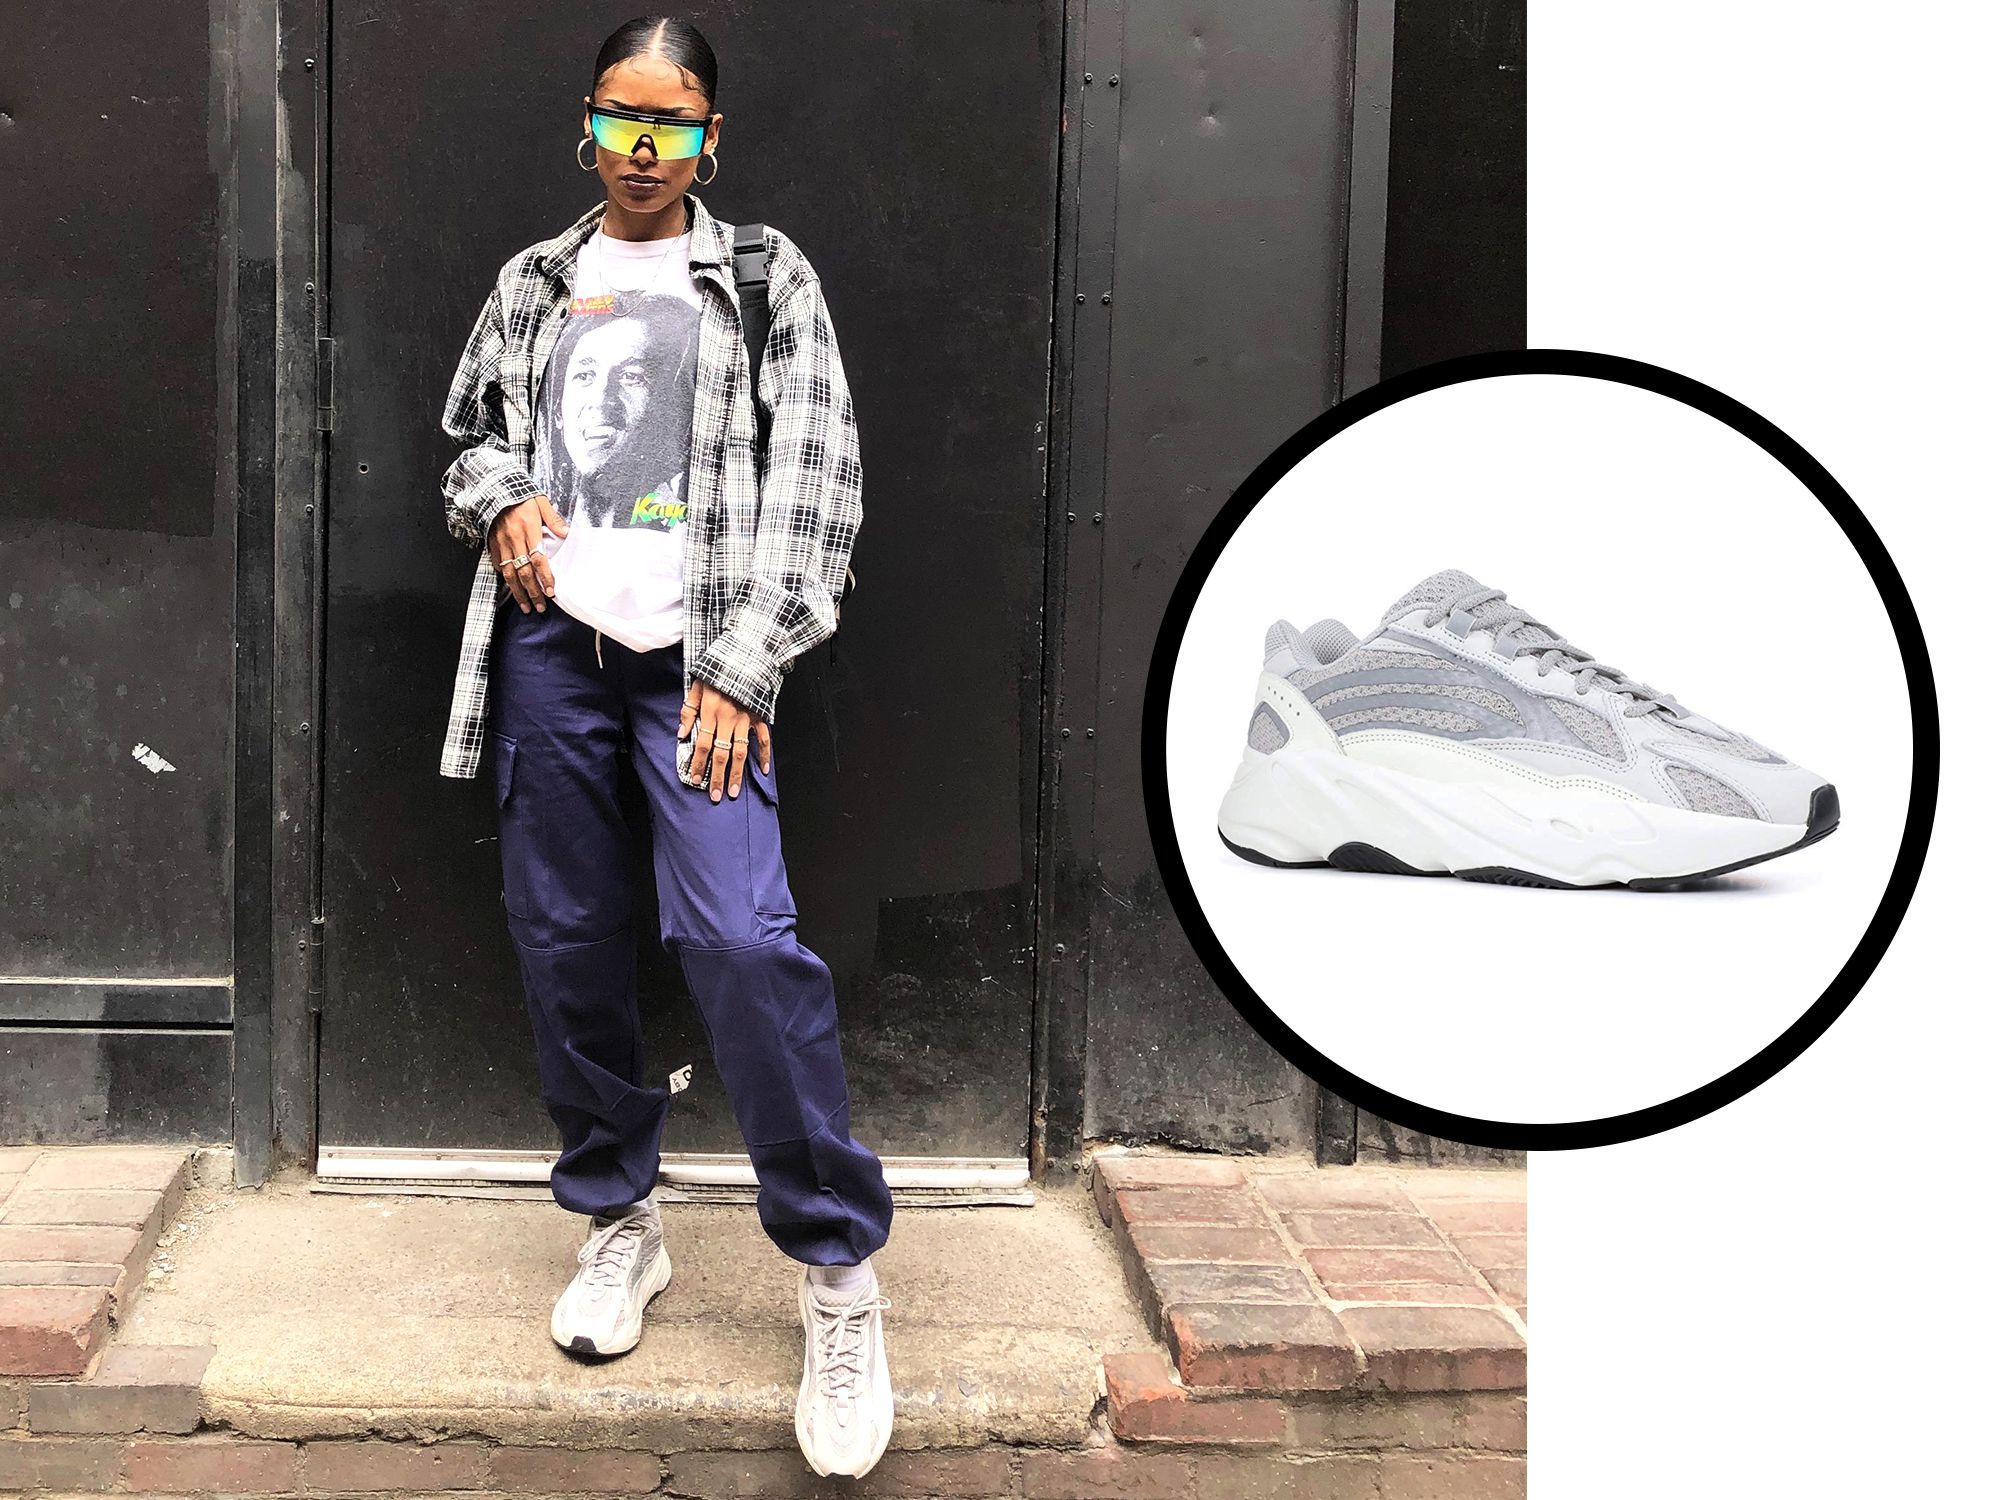 The Hottest Sneakers to Right Now, According to Your Favorite Influencers